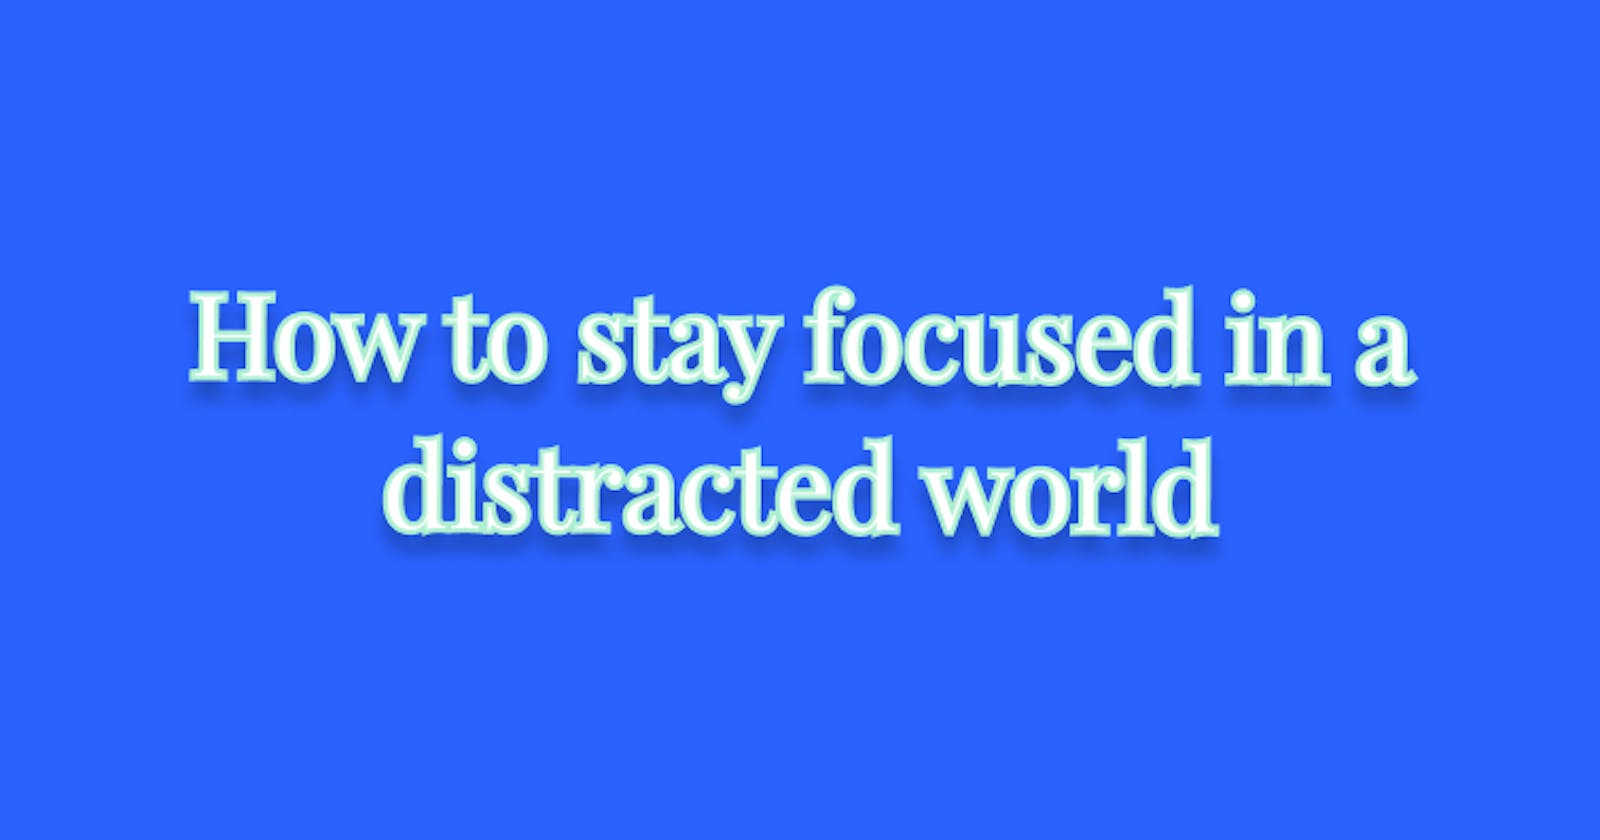 How to stay focused in a distracted world